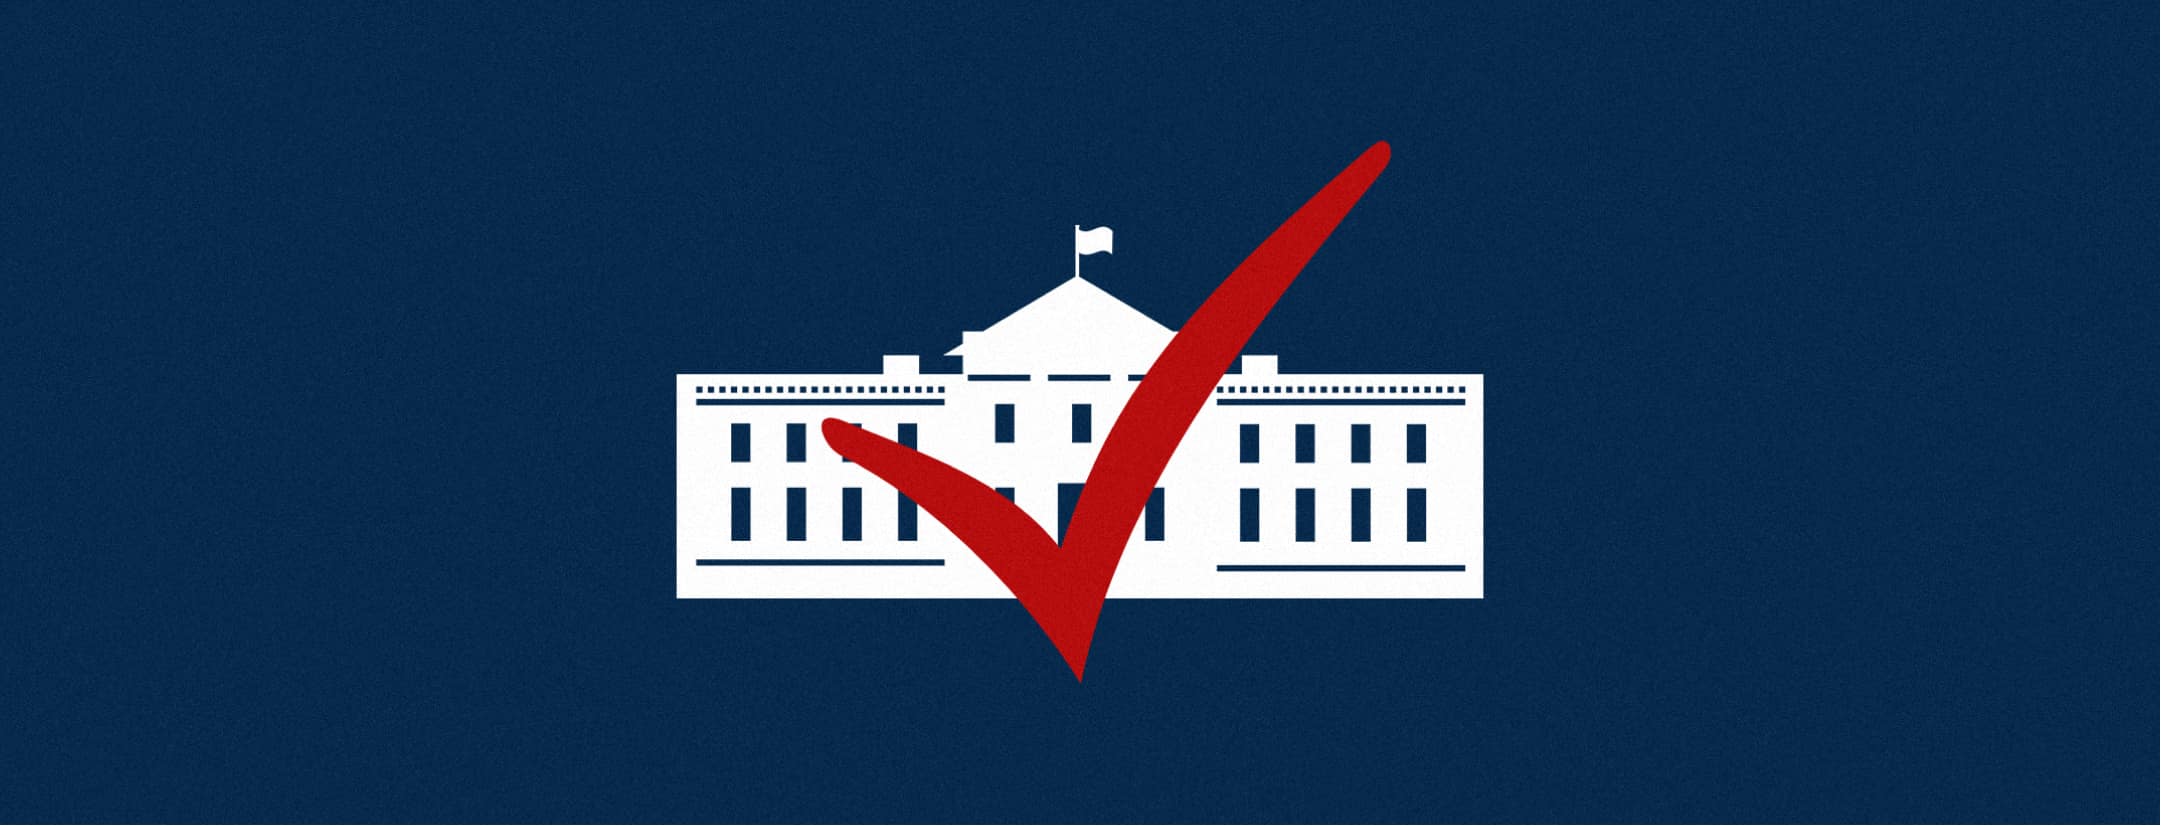 What to Look for in Website Accessibility: Audit of WhiteHouse.gov